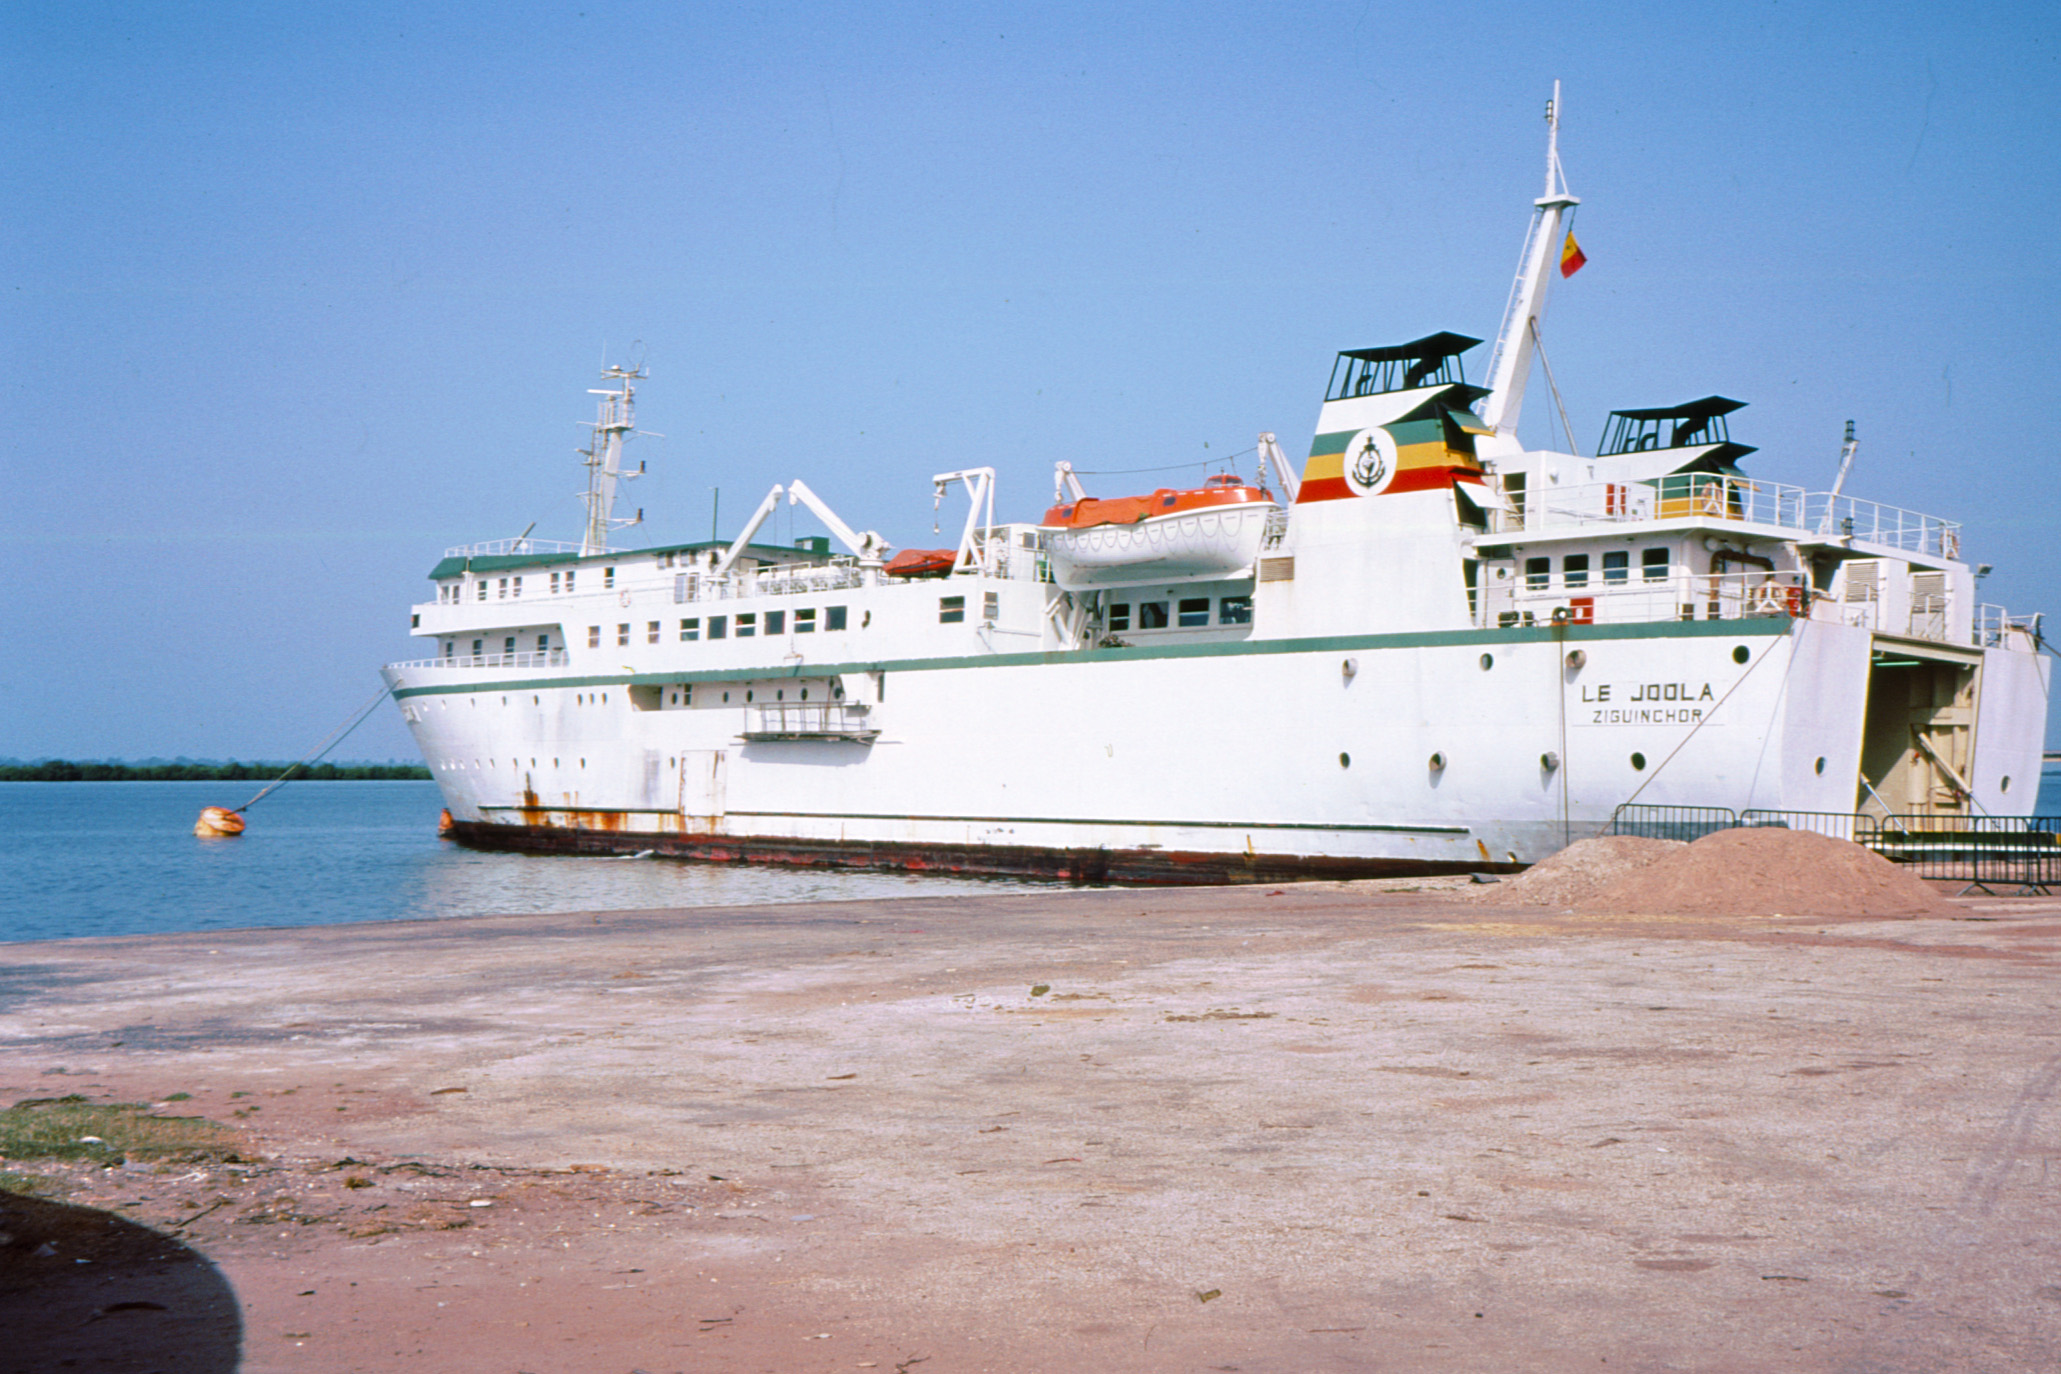 The ship M/S “JOOLA”, 20 years and nearly 2,000 dead and after